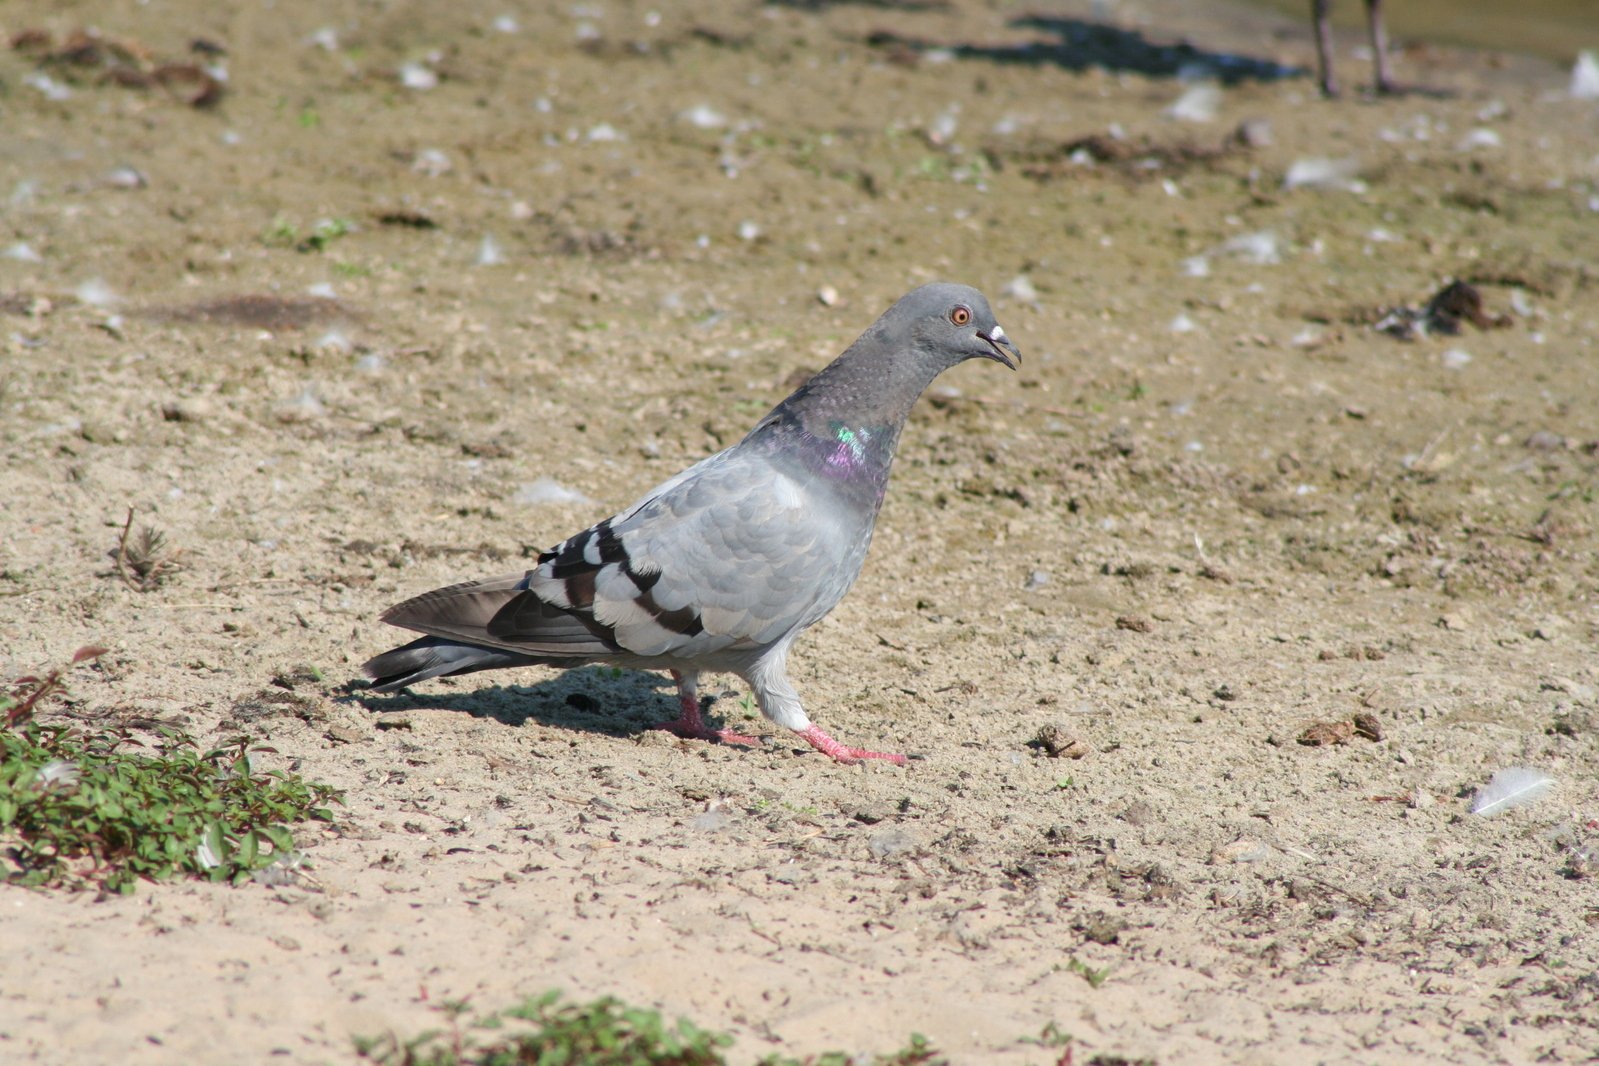 the pigeon is standing alone on the beach